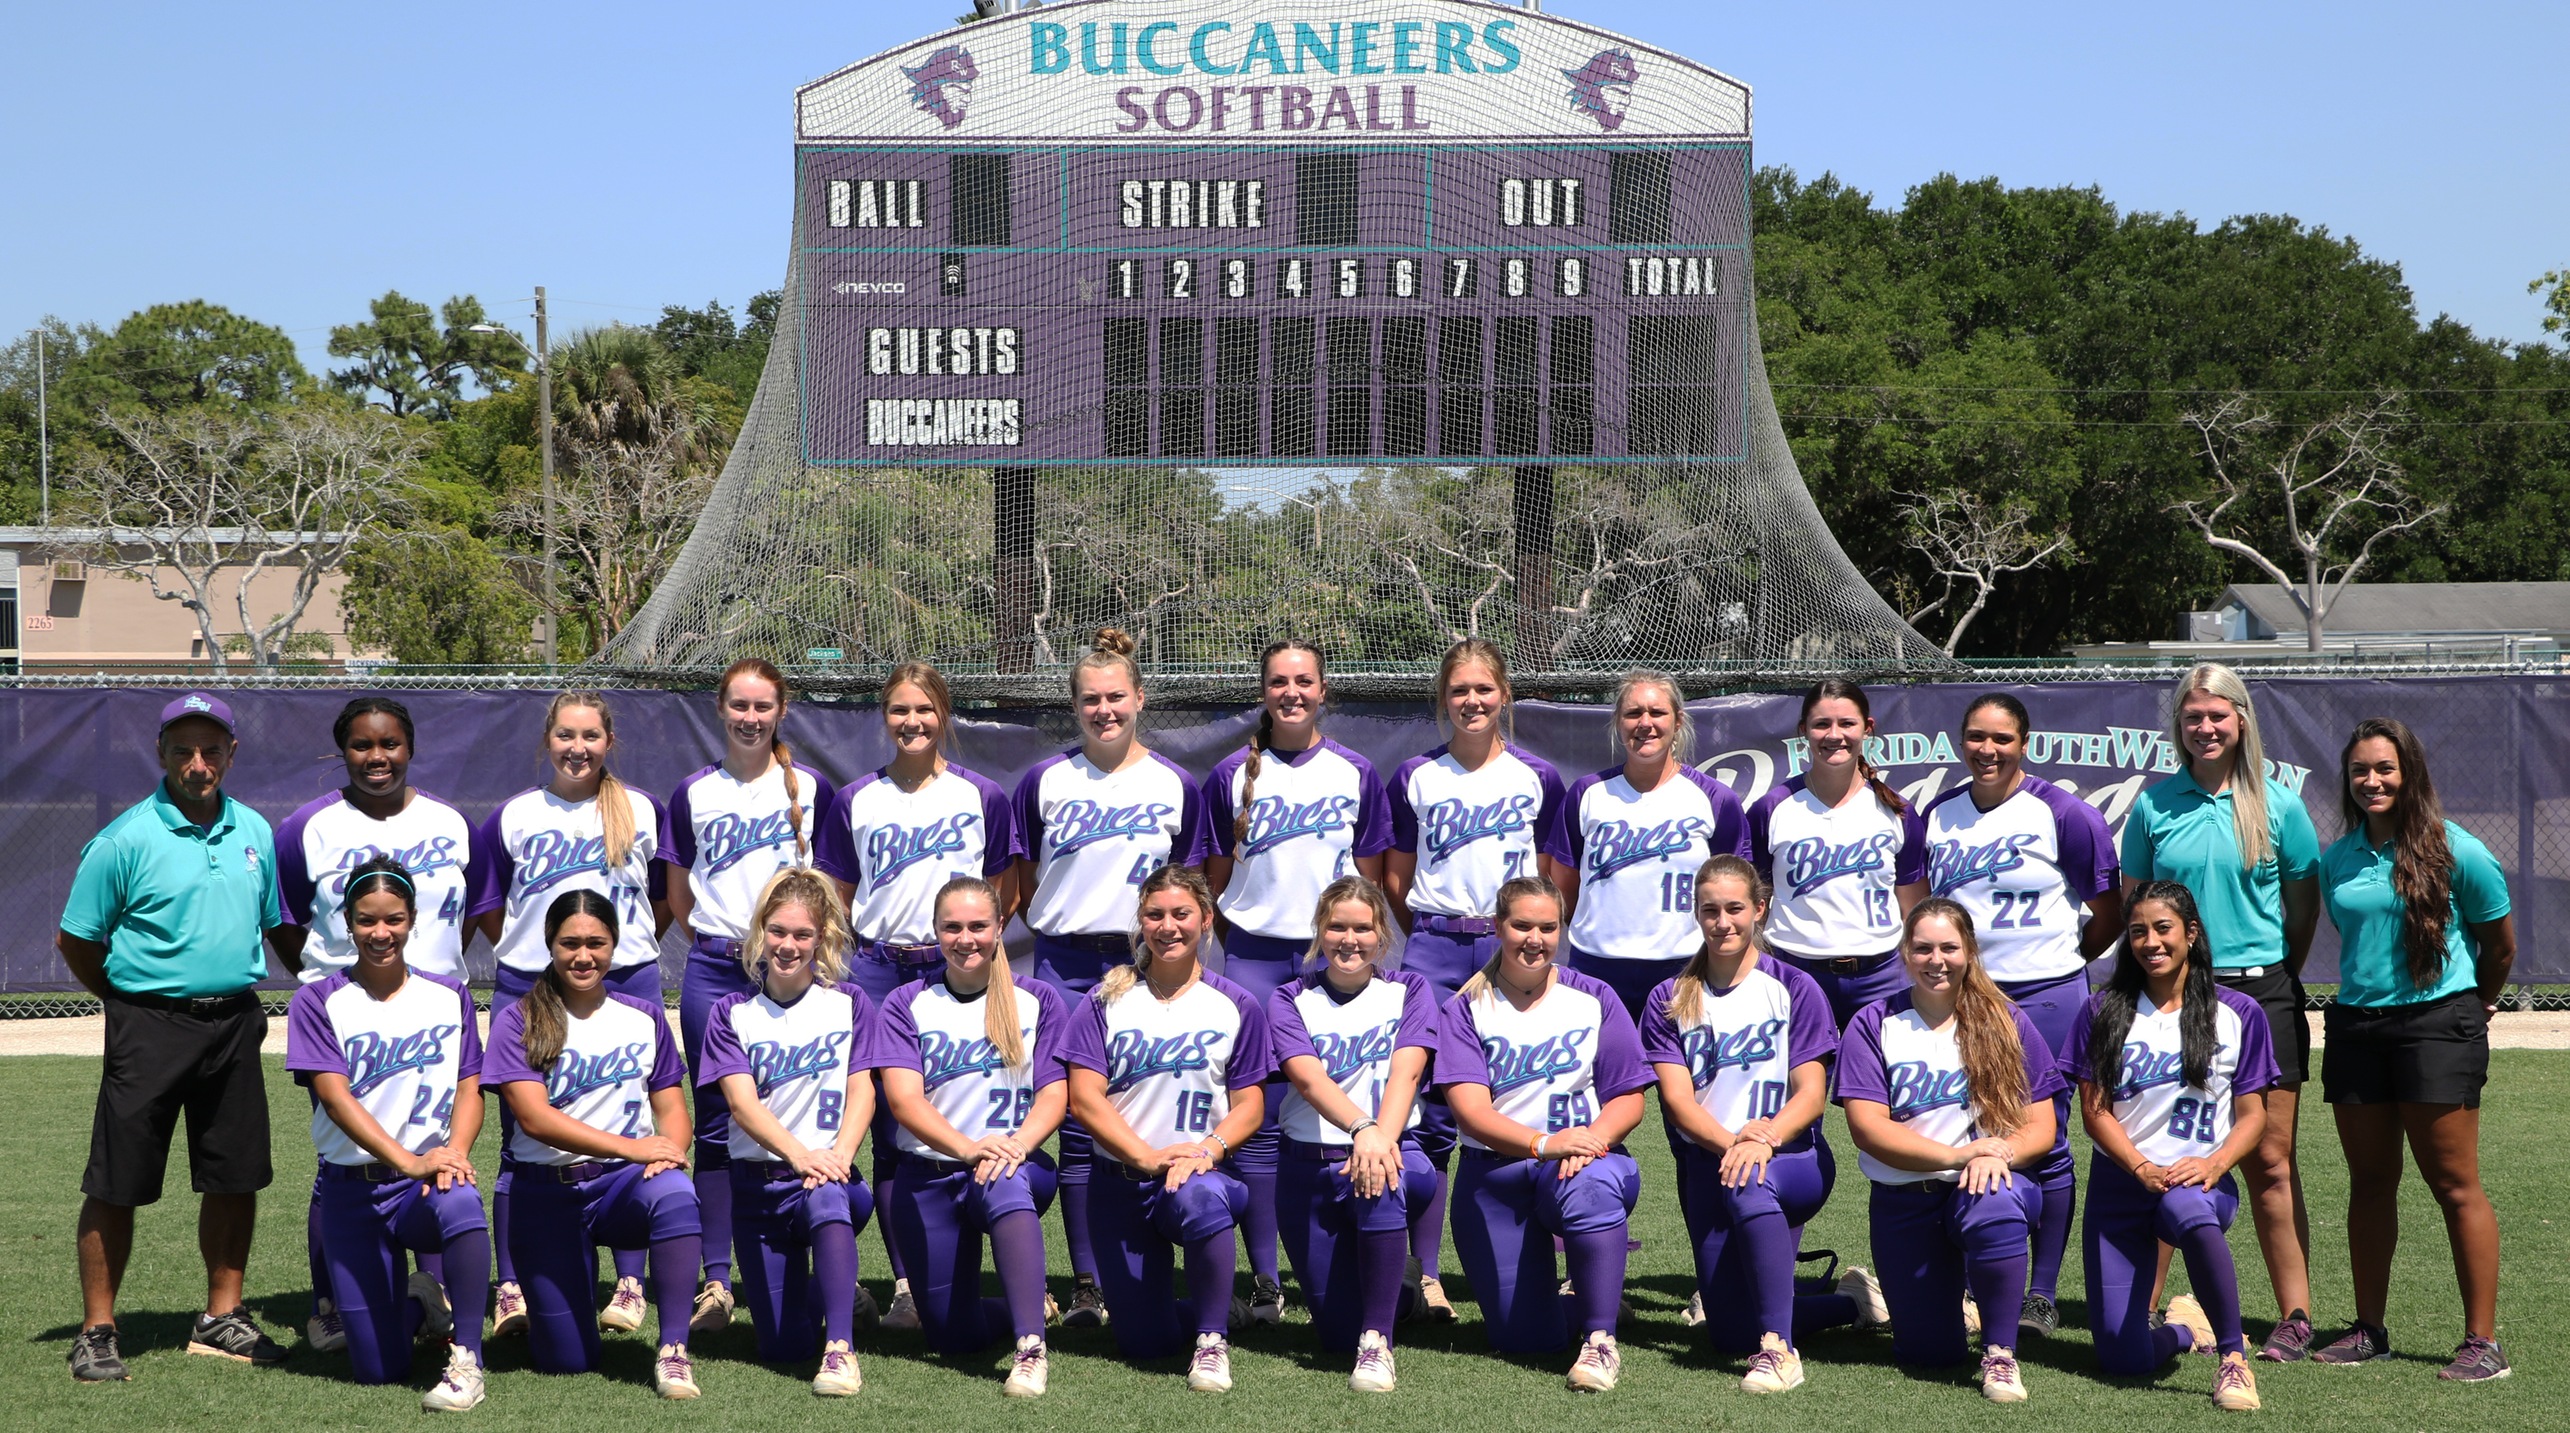 Bucs Complete Undefeated Conference Season, Win 5th Straight Suncoast Championship